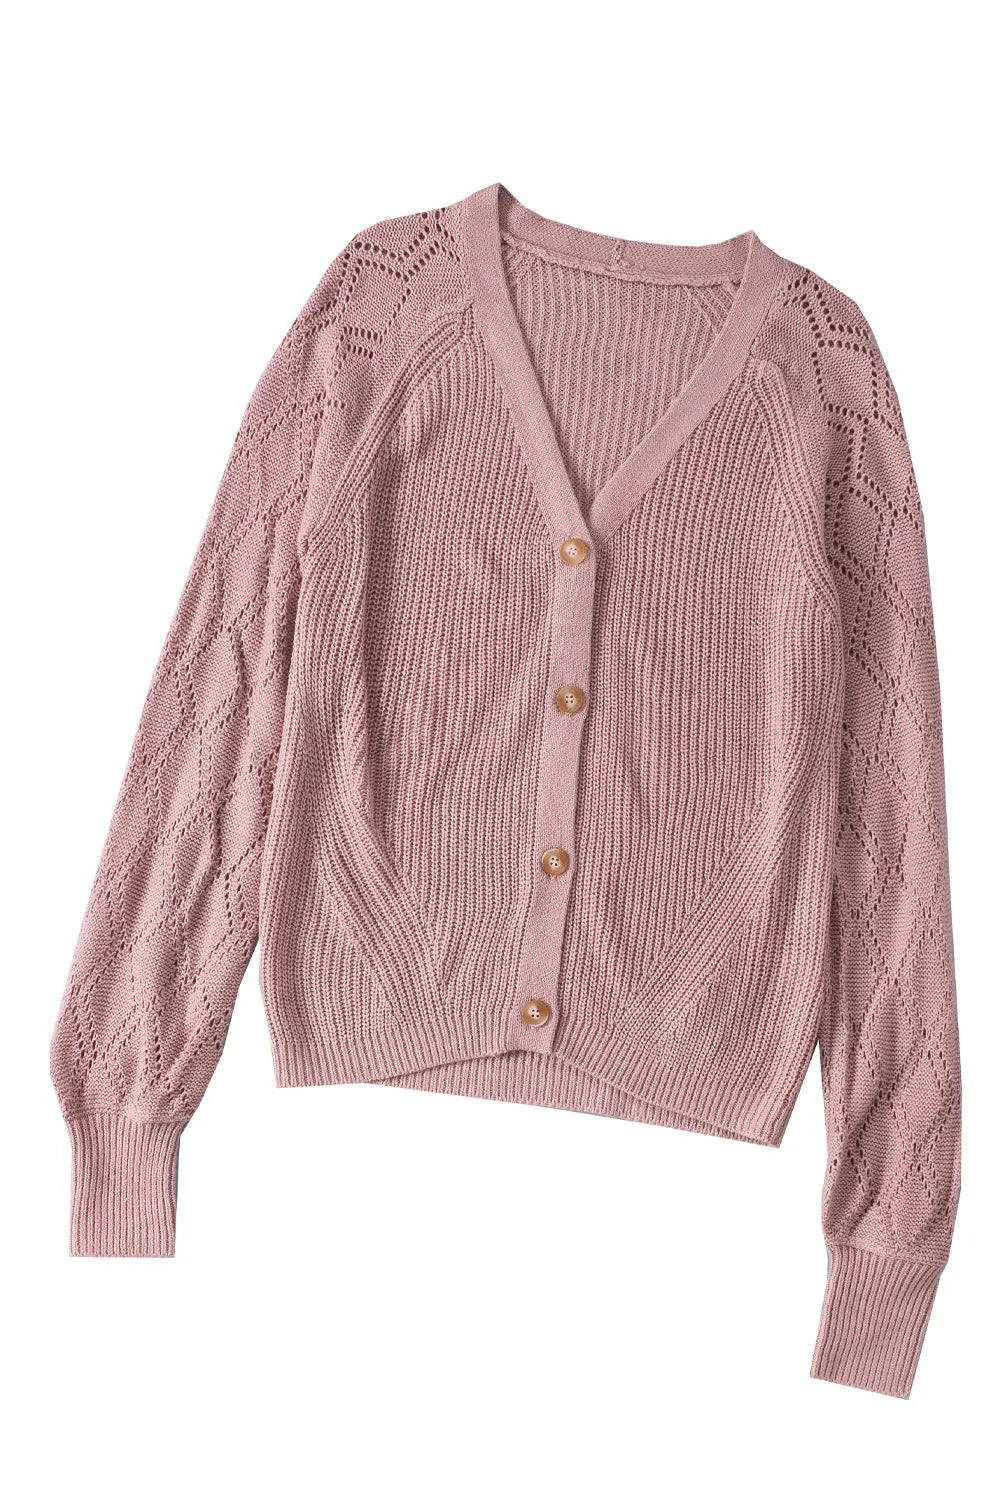 Bishop sleeve button v neck sweater - sweaters & cardigans